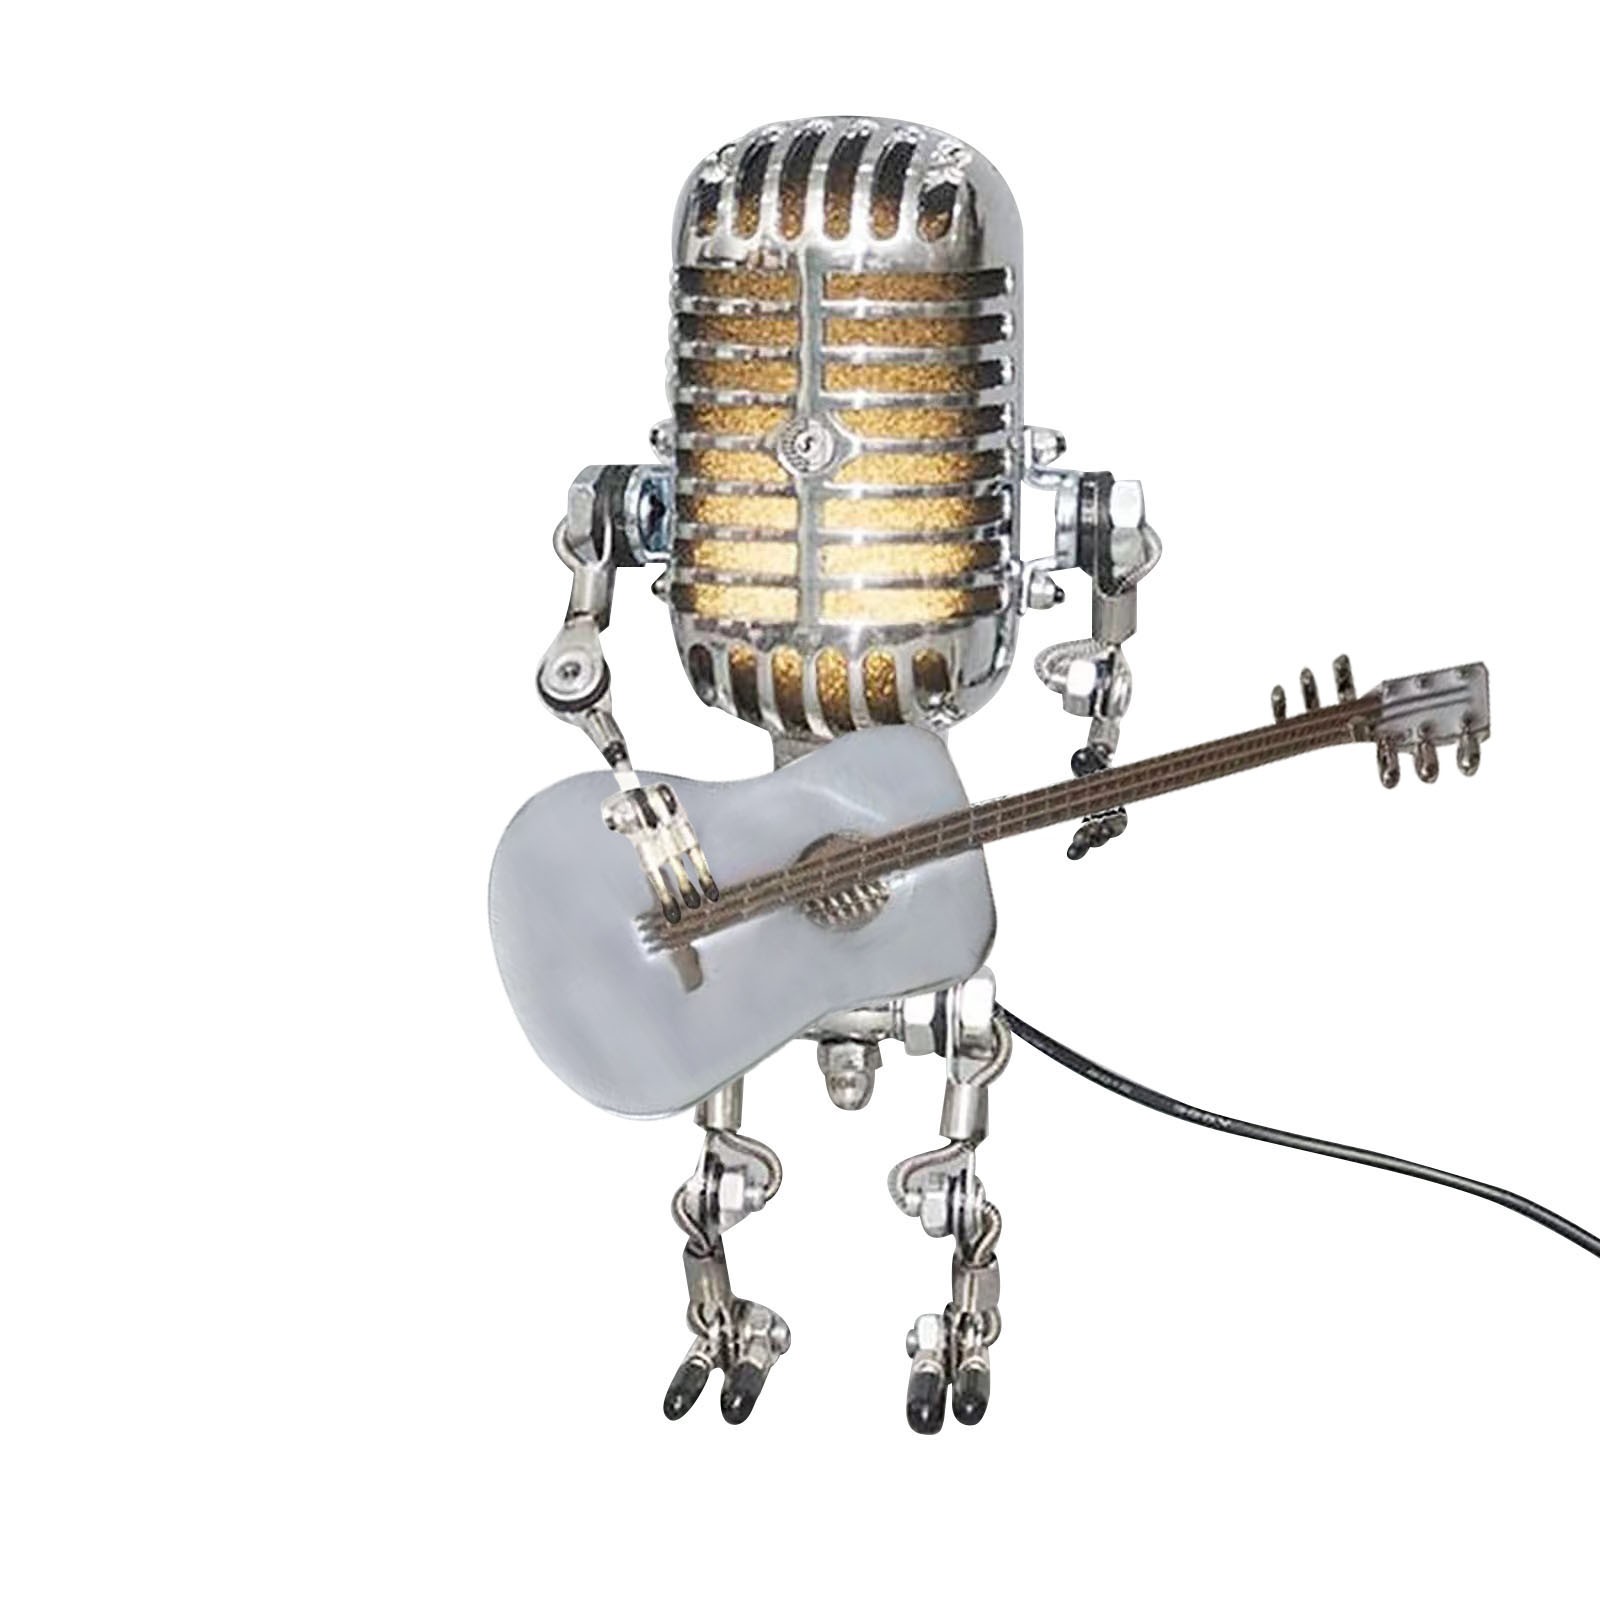 SDJMa Desk Lamp,Handmade Vintage Microphone Guitar Robot Table Lamp LED Bulbs Wall Lamp Home Desktop Decoration - Height 8.5 inch,Width 4 inch and Depth 3 inch - image 1 of 8